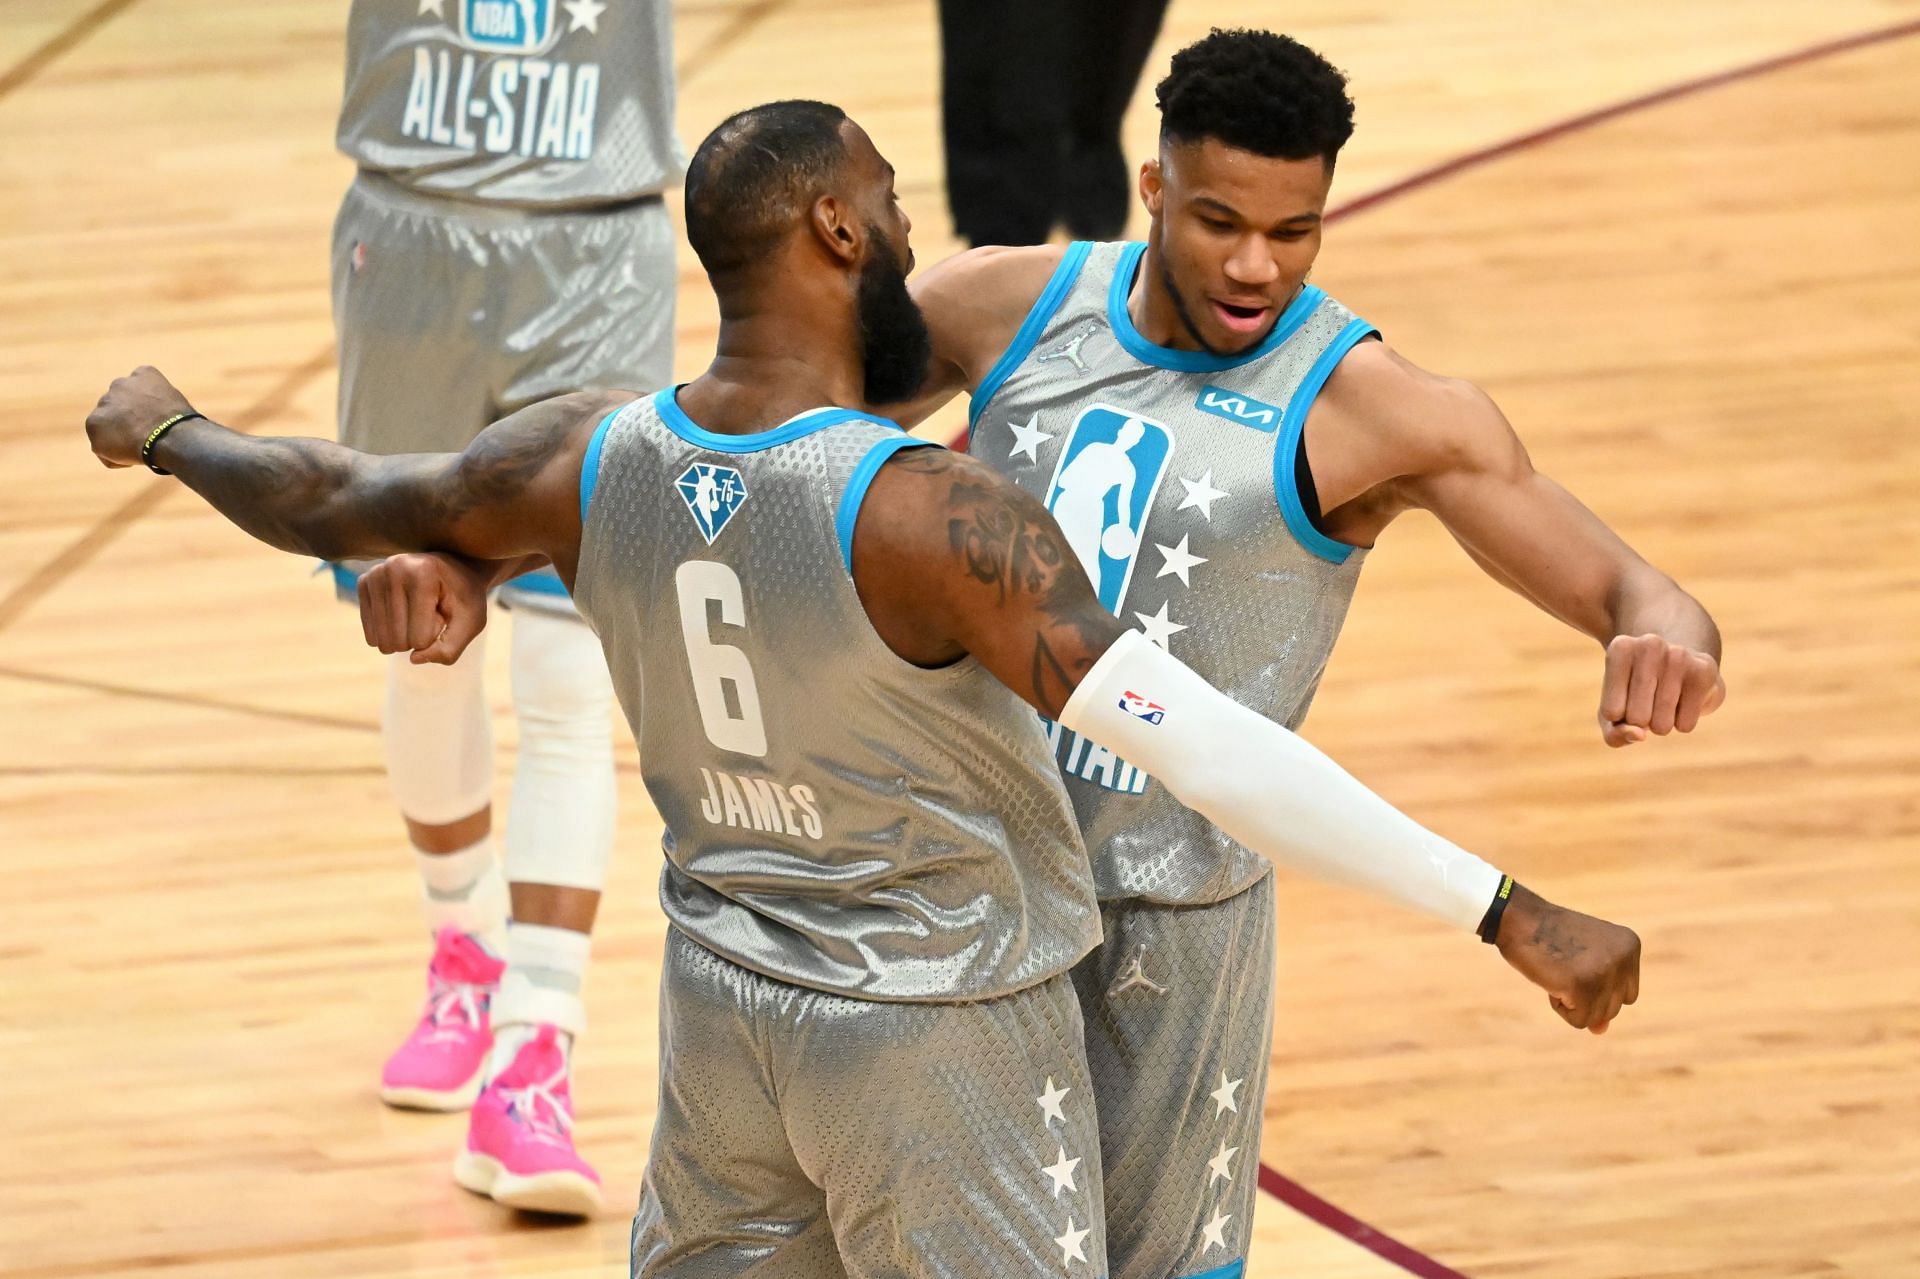 LeBron James chest bumps Giannis Antetokounmpo after hitting the game-winner at the 2022 NBA All-Star Game